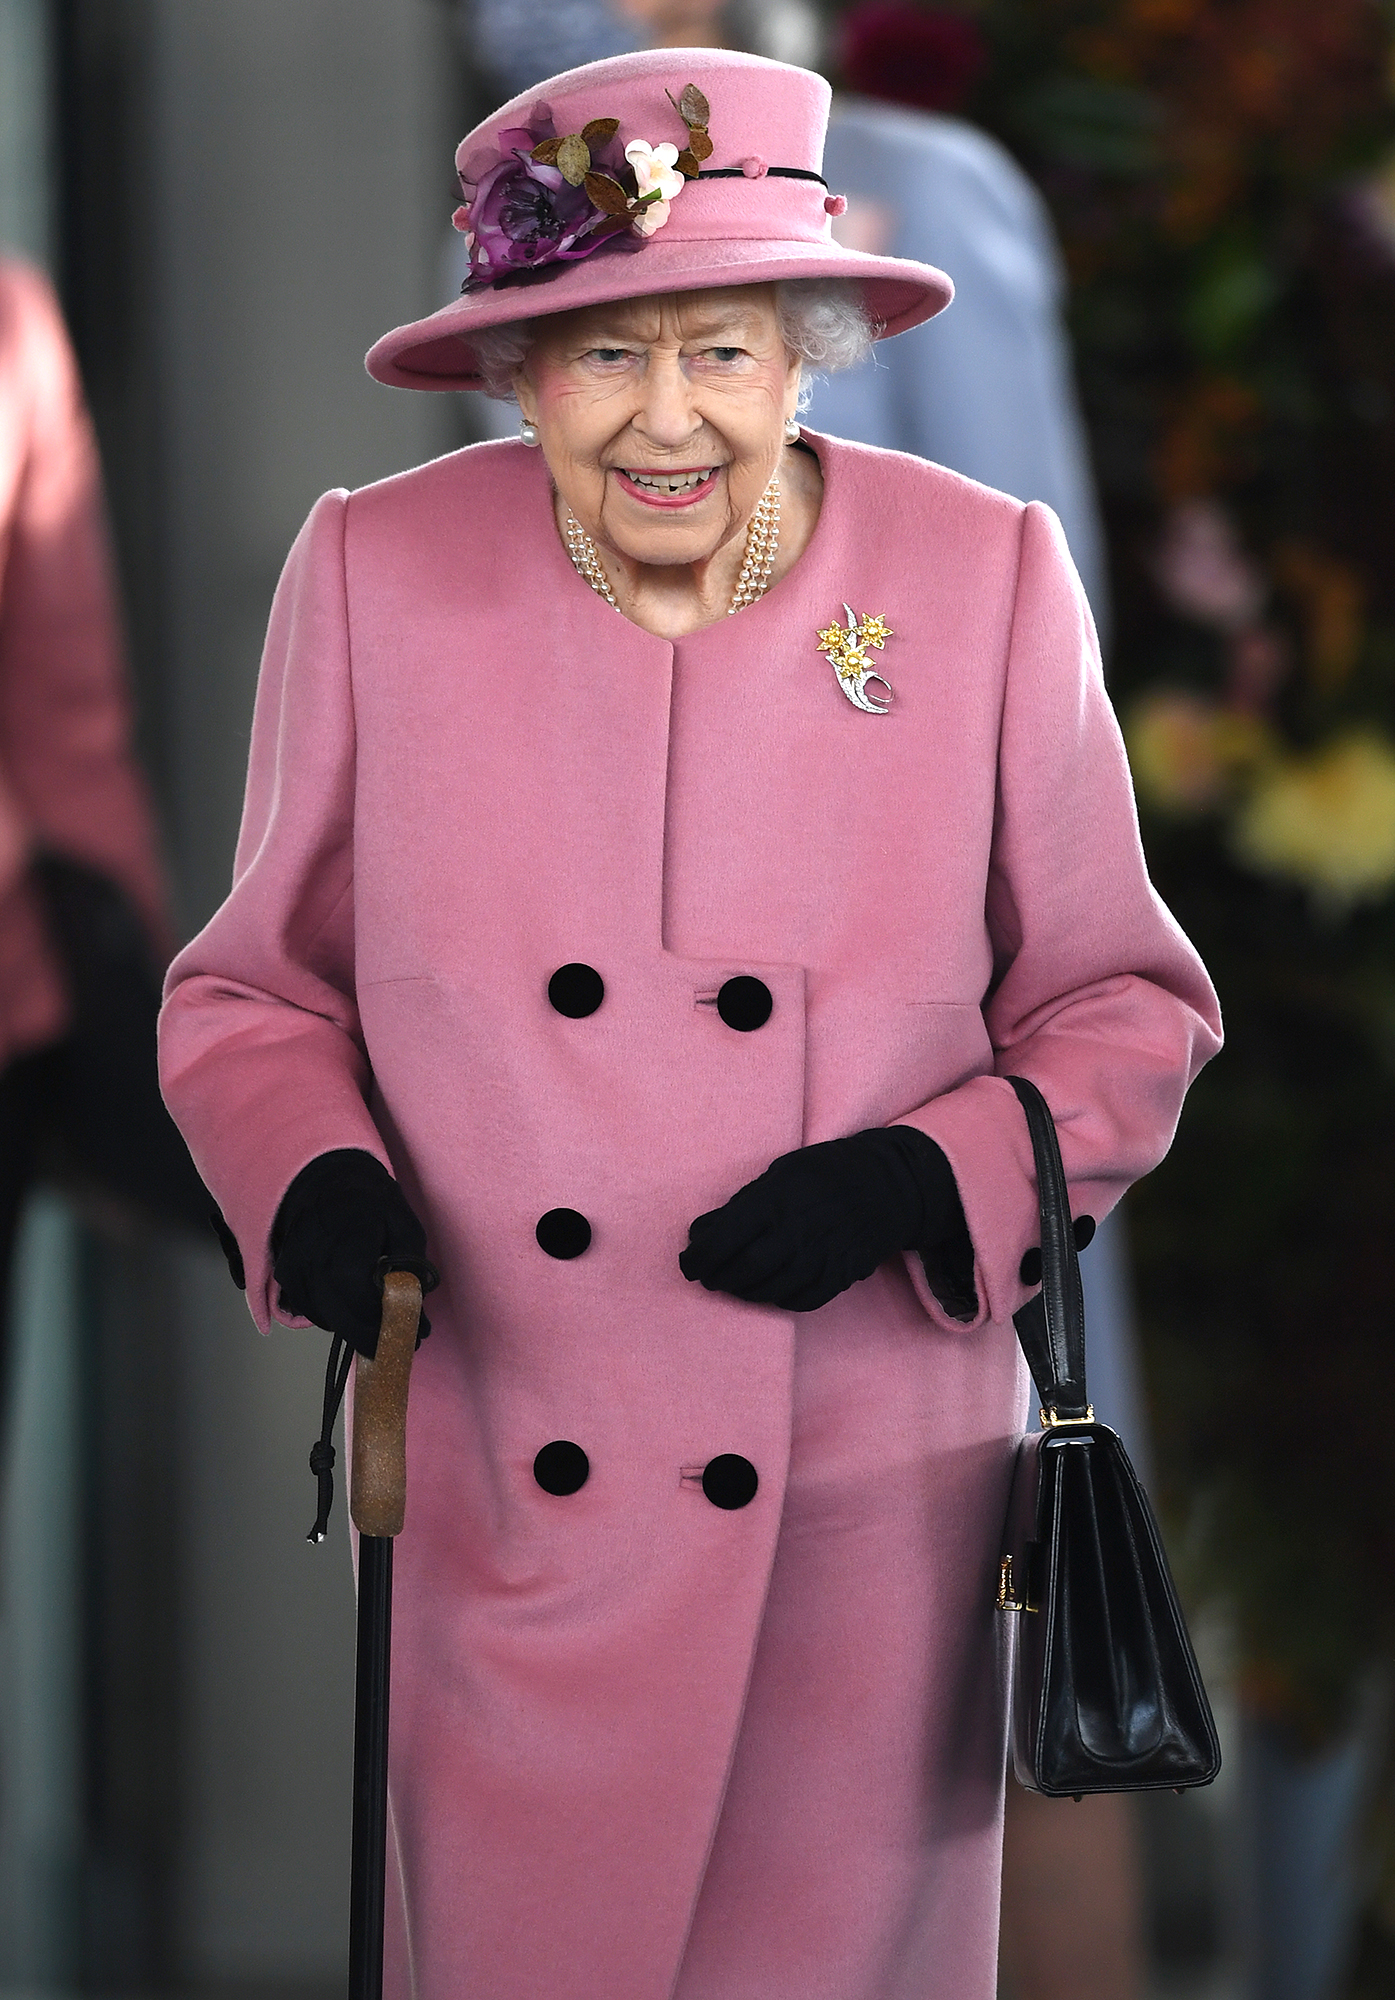 Queen Elizabeth II Returns to Royal Duties After Missing Remembrance Day Service